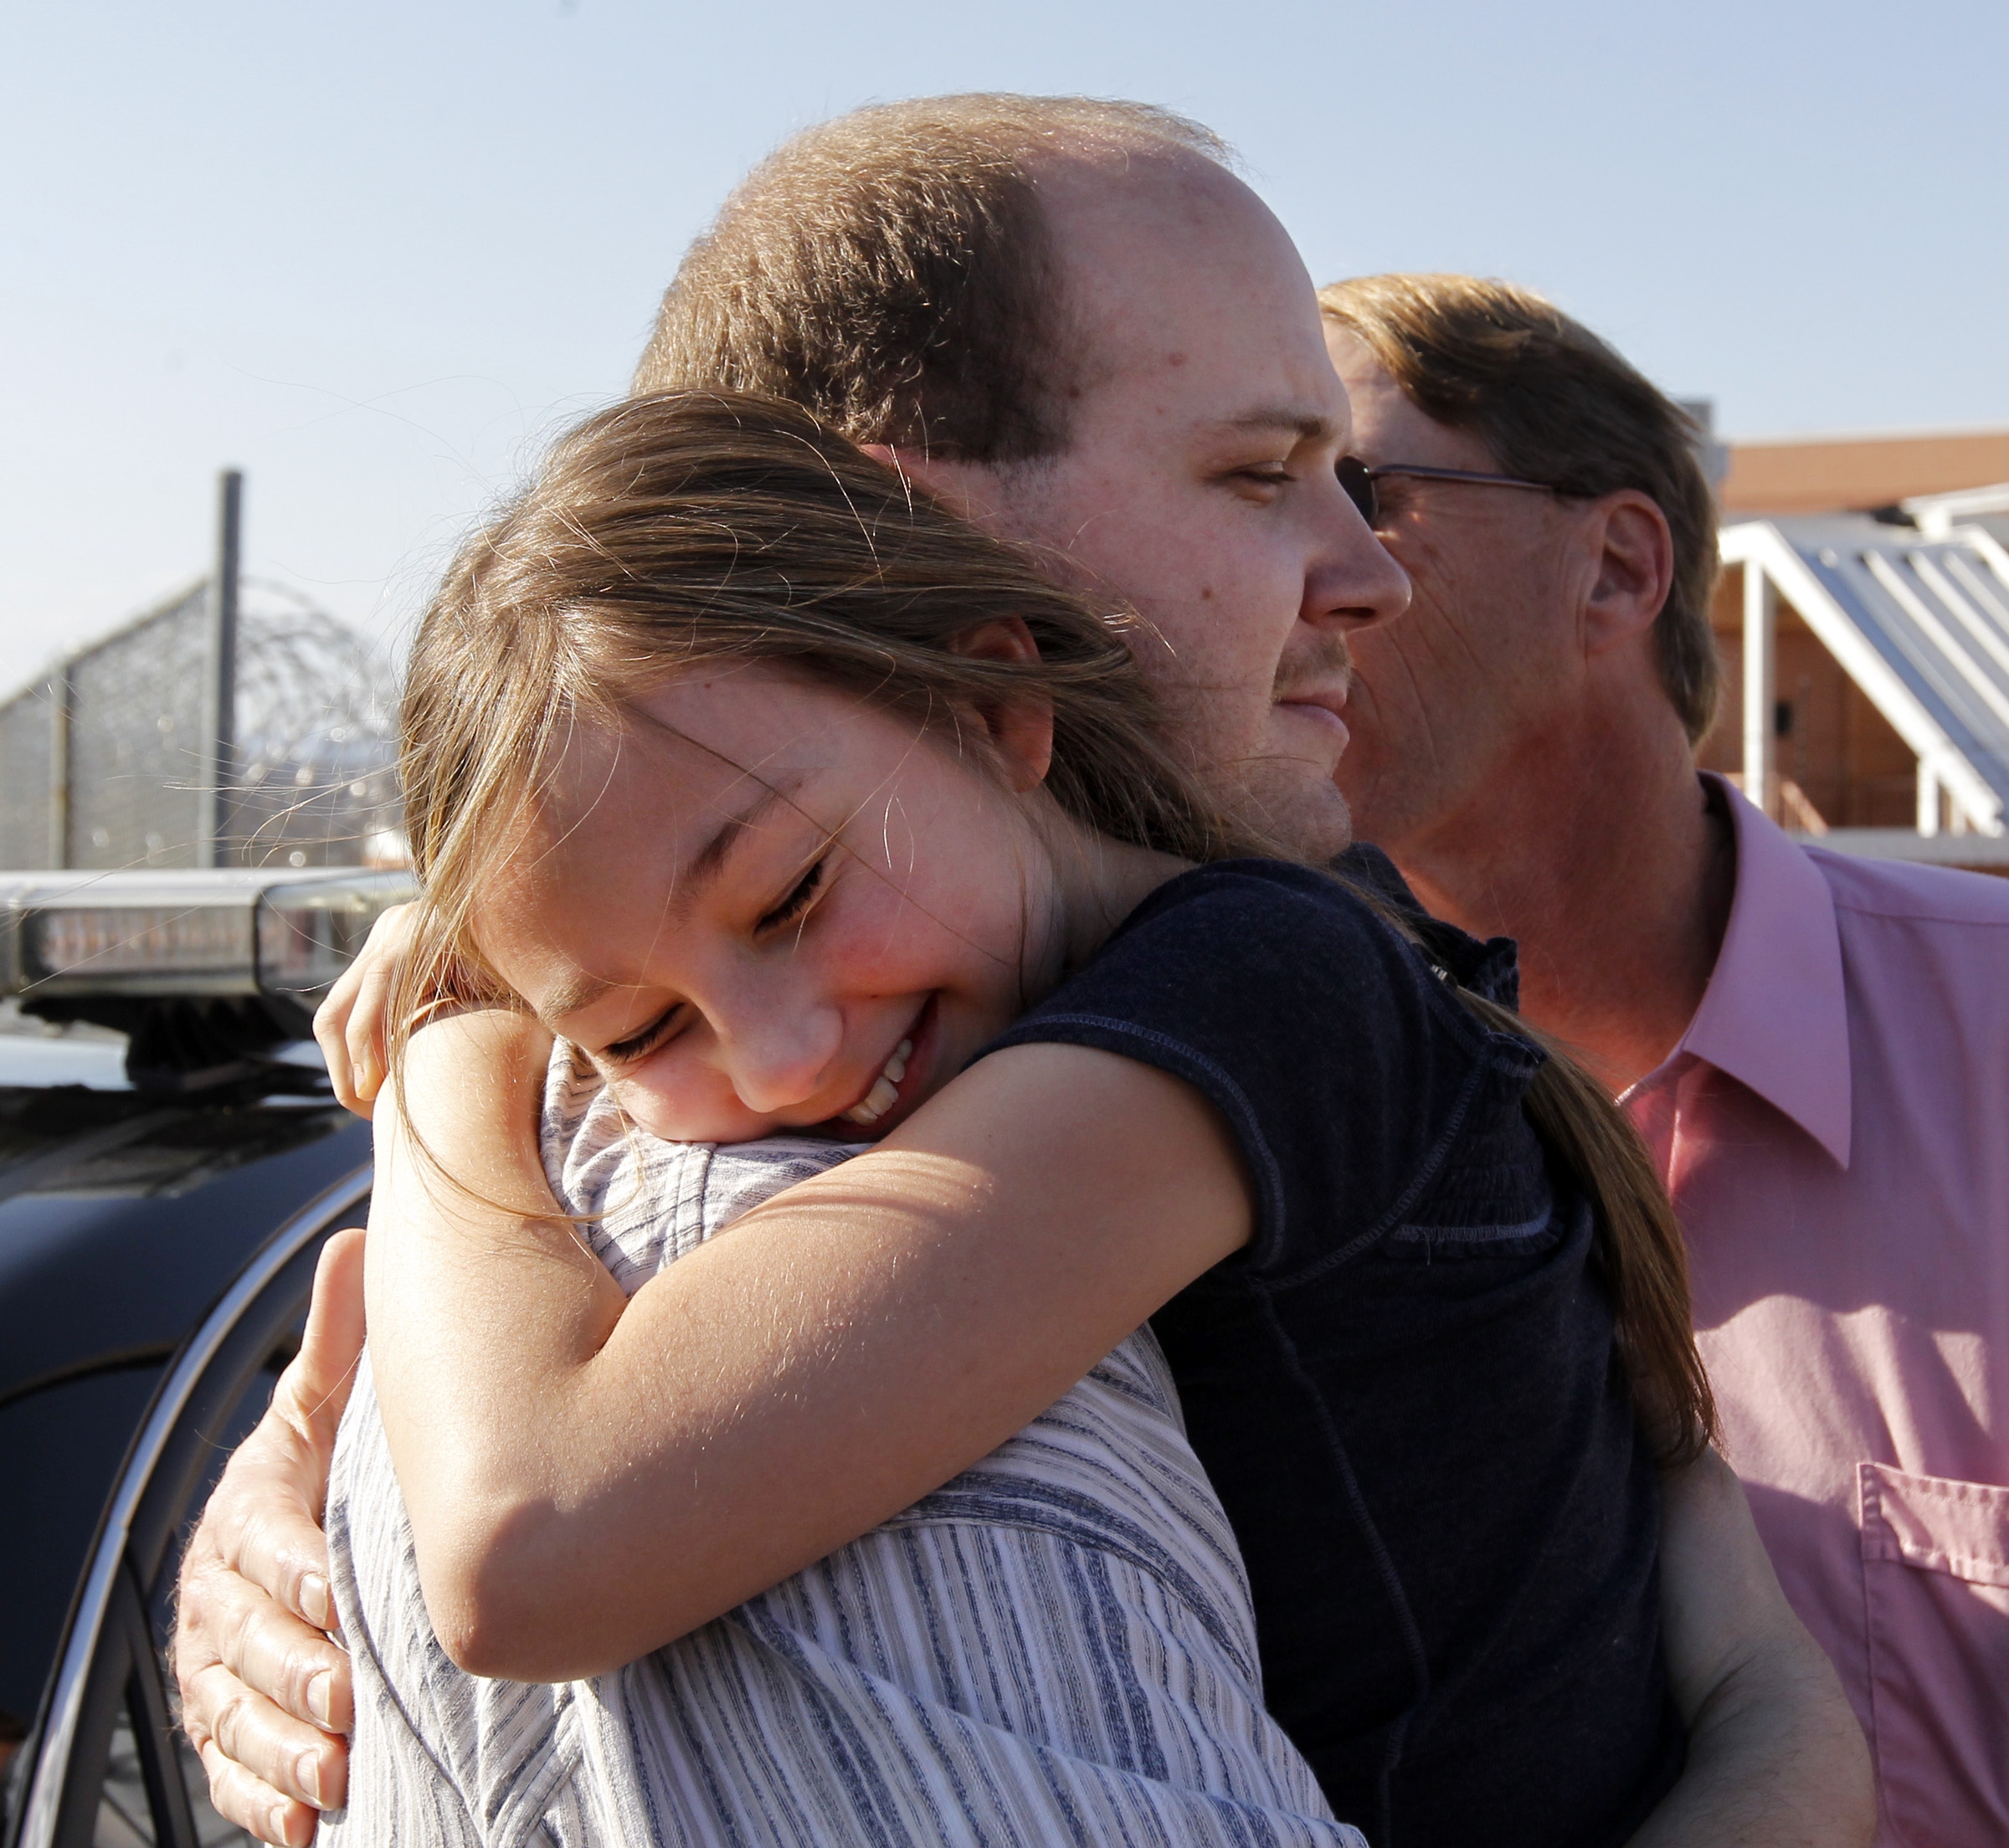 Sabrina Hash, 9, hugs her uncle, Michael Wayne Hash after his release from the Albemarle RegionaJail Wednesday, March 14, 2012. His conviction for a 1996 killing was overturned earlier by a judge citing police and prosecutorial misconduct. At right is his father, Douglas Hash.